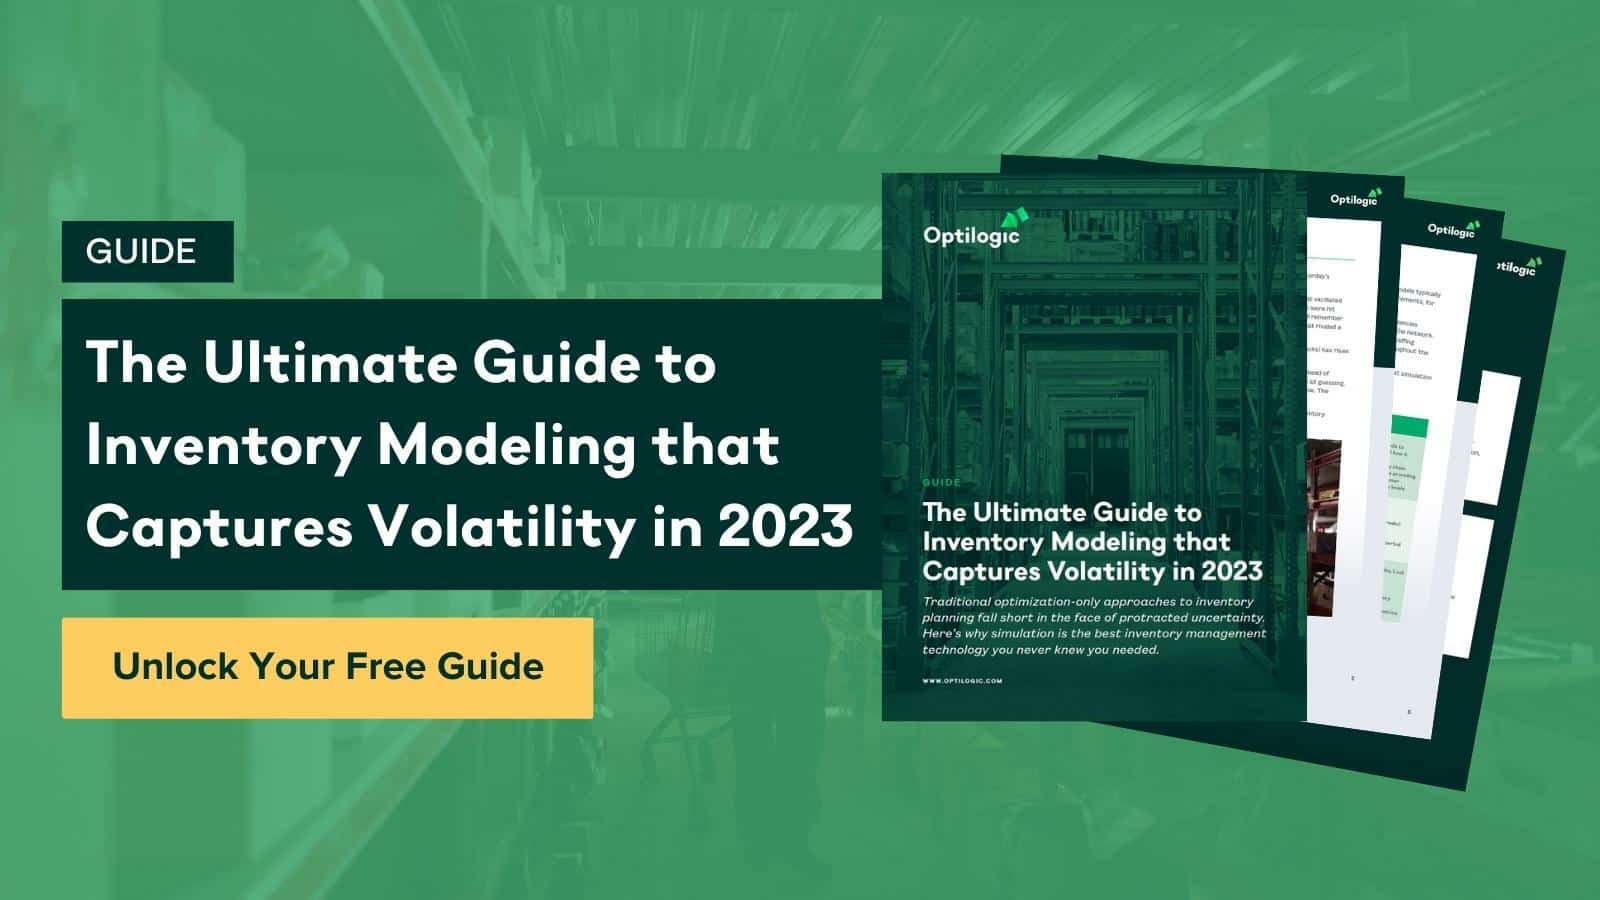 Guide-Inventory-Modeling-2023